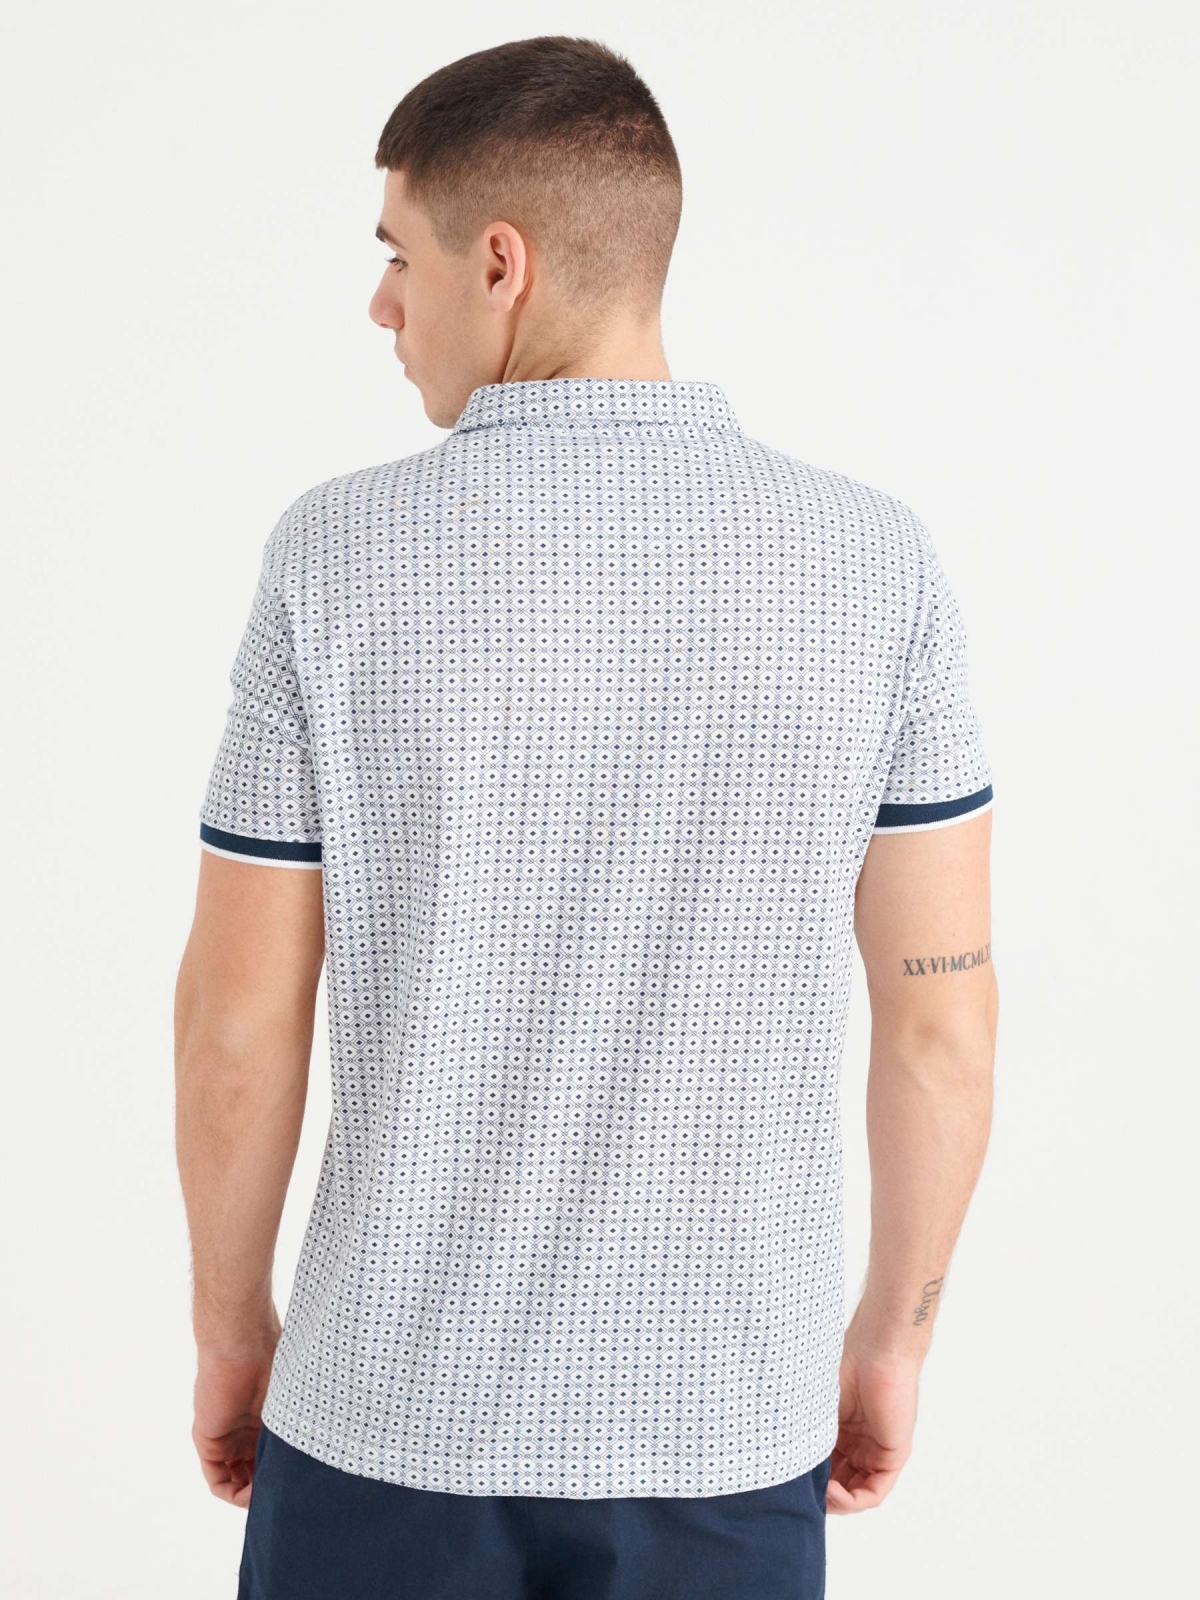 Jacquard polo shirt with pocket navy middle back view